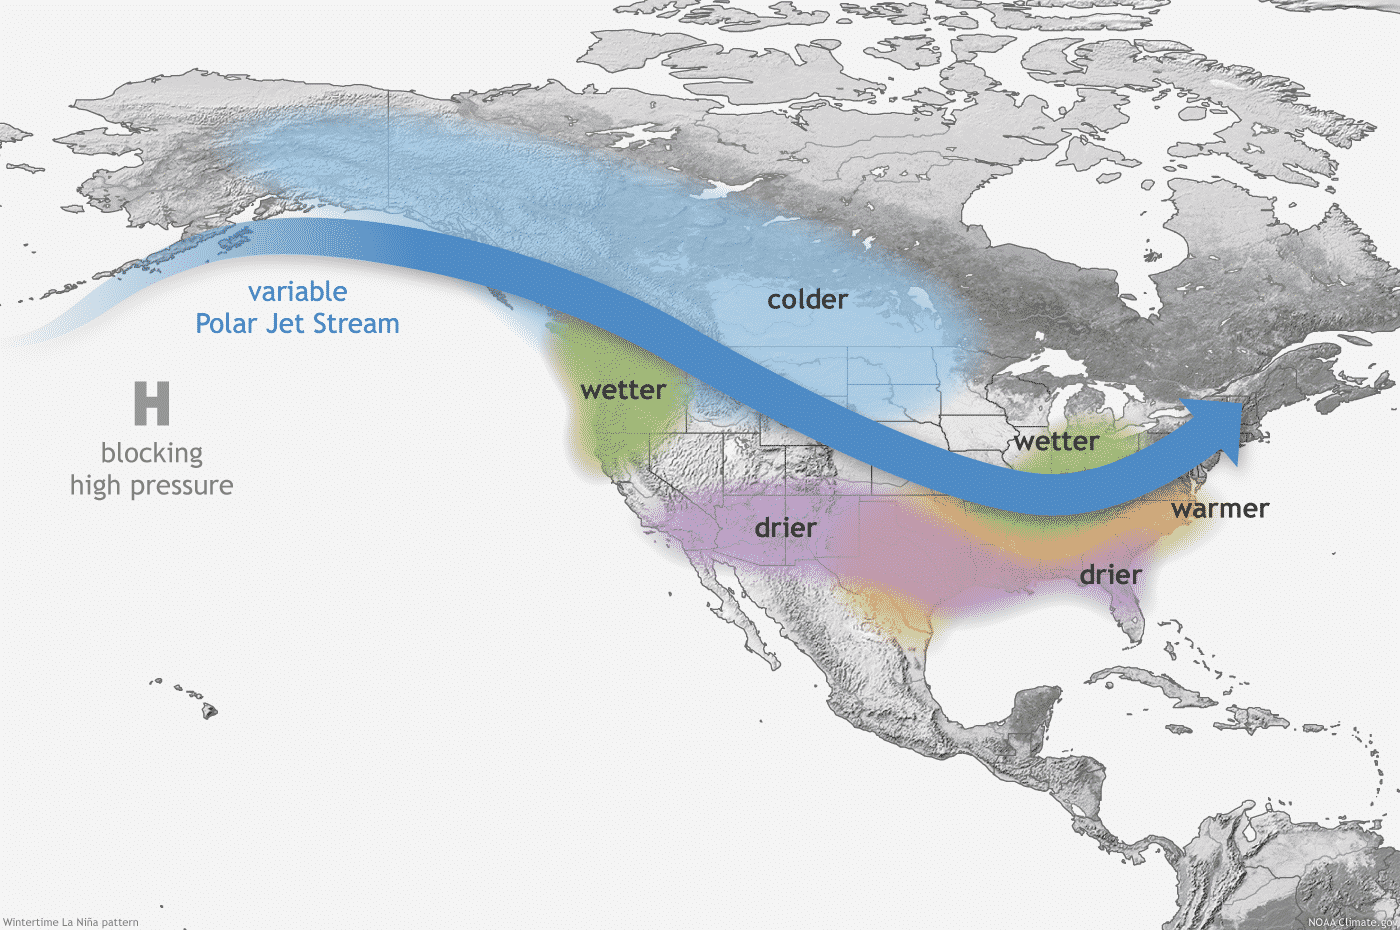 winter-forecast-2022-2023-update-enso-jet-stream-snowfall-weather-pattern-united-states-canada-pattern-final-update